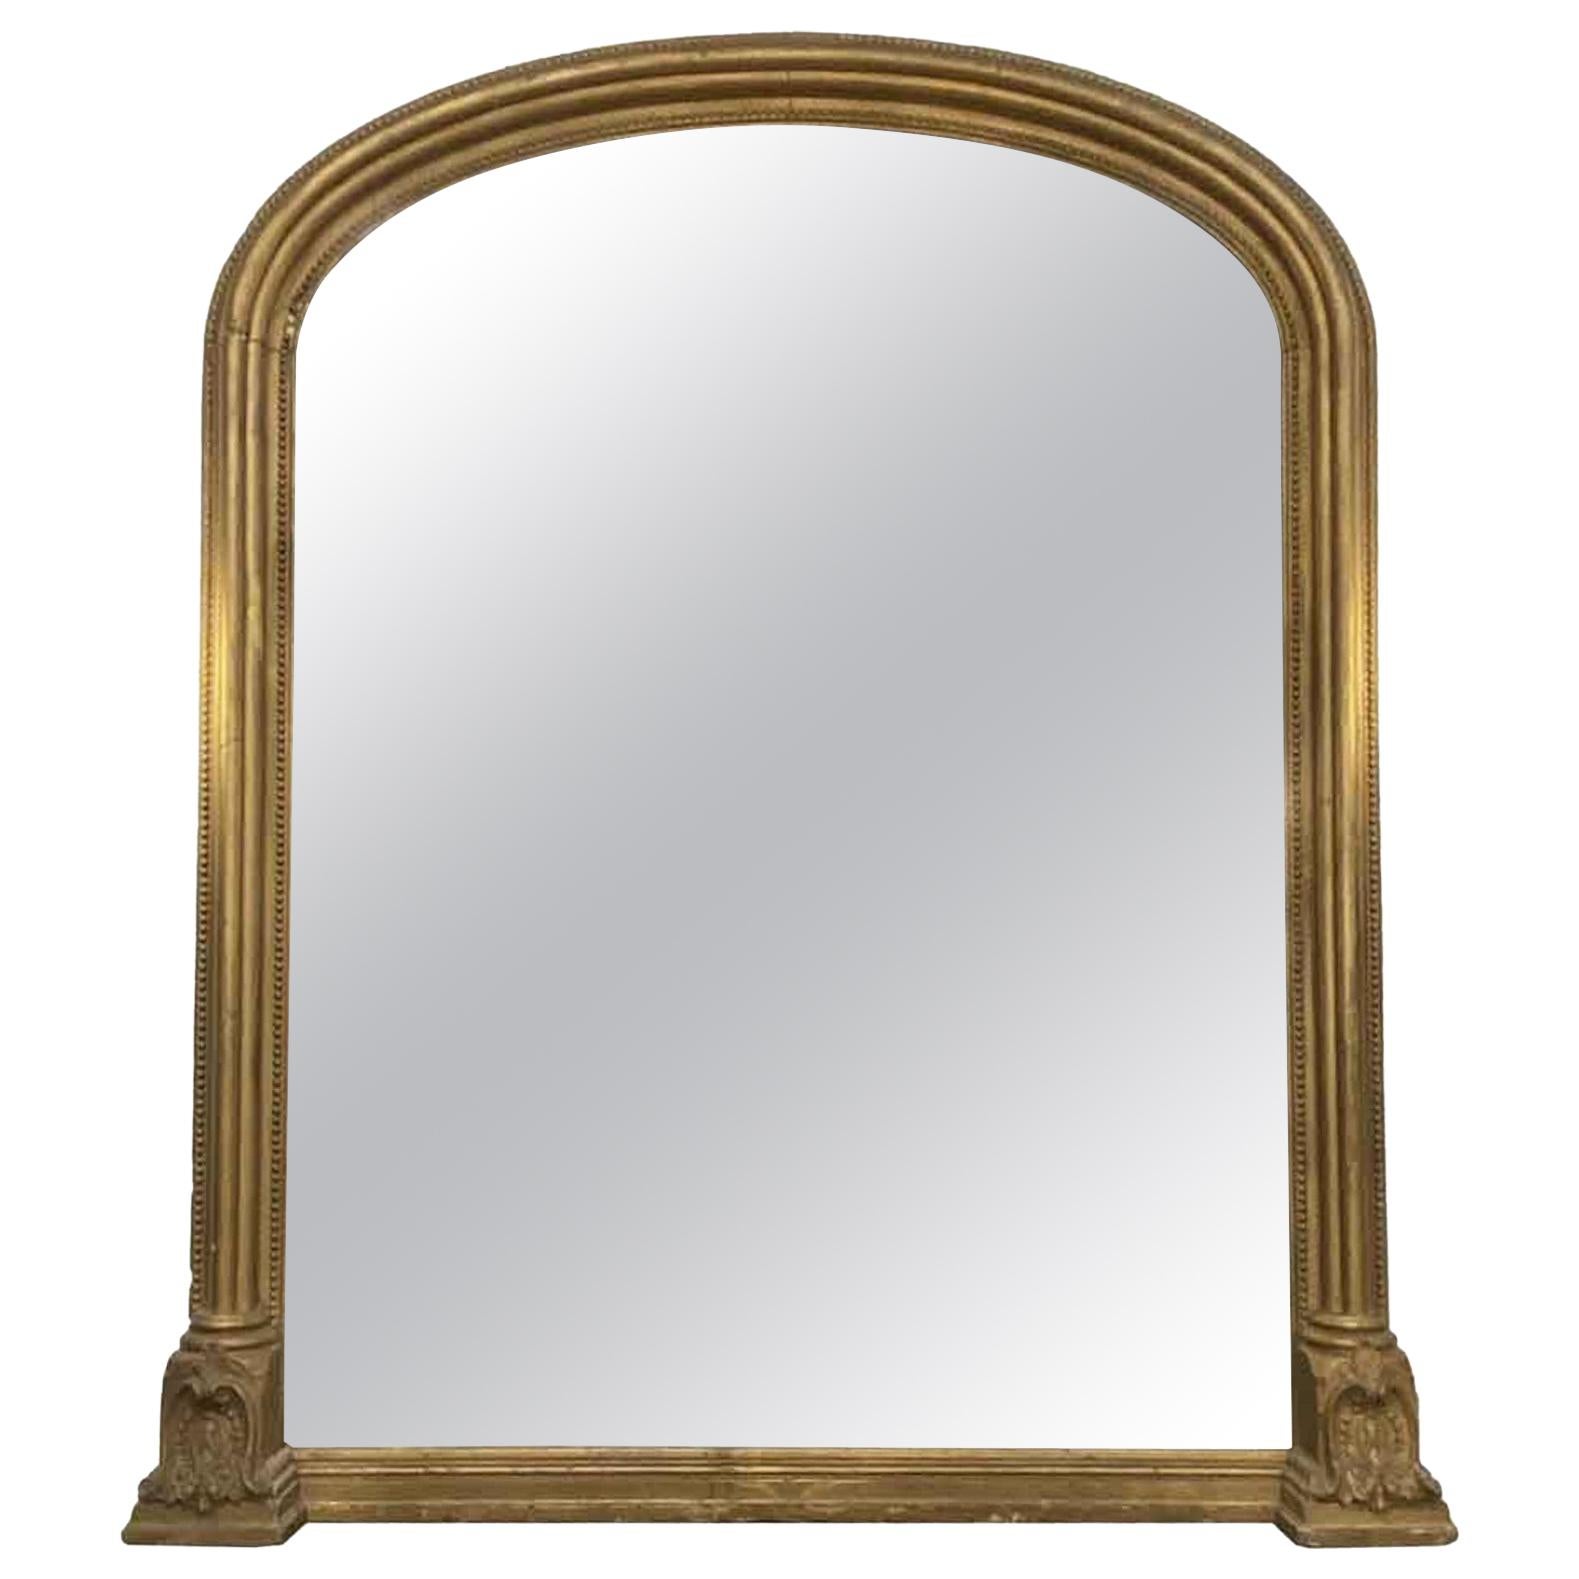 A.I.C. Overmantel Gilded Mirror with Light Foxing Antique